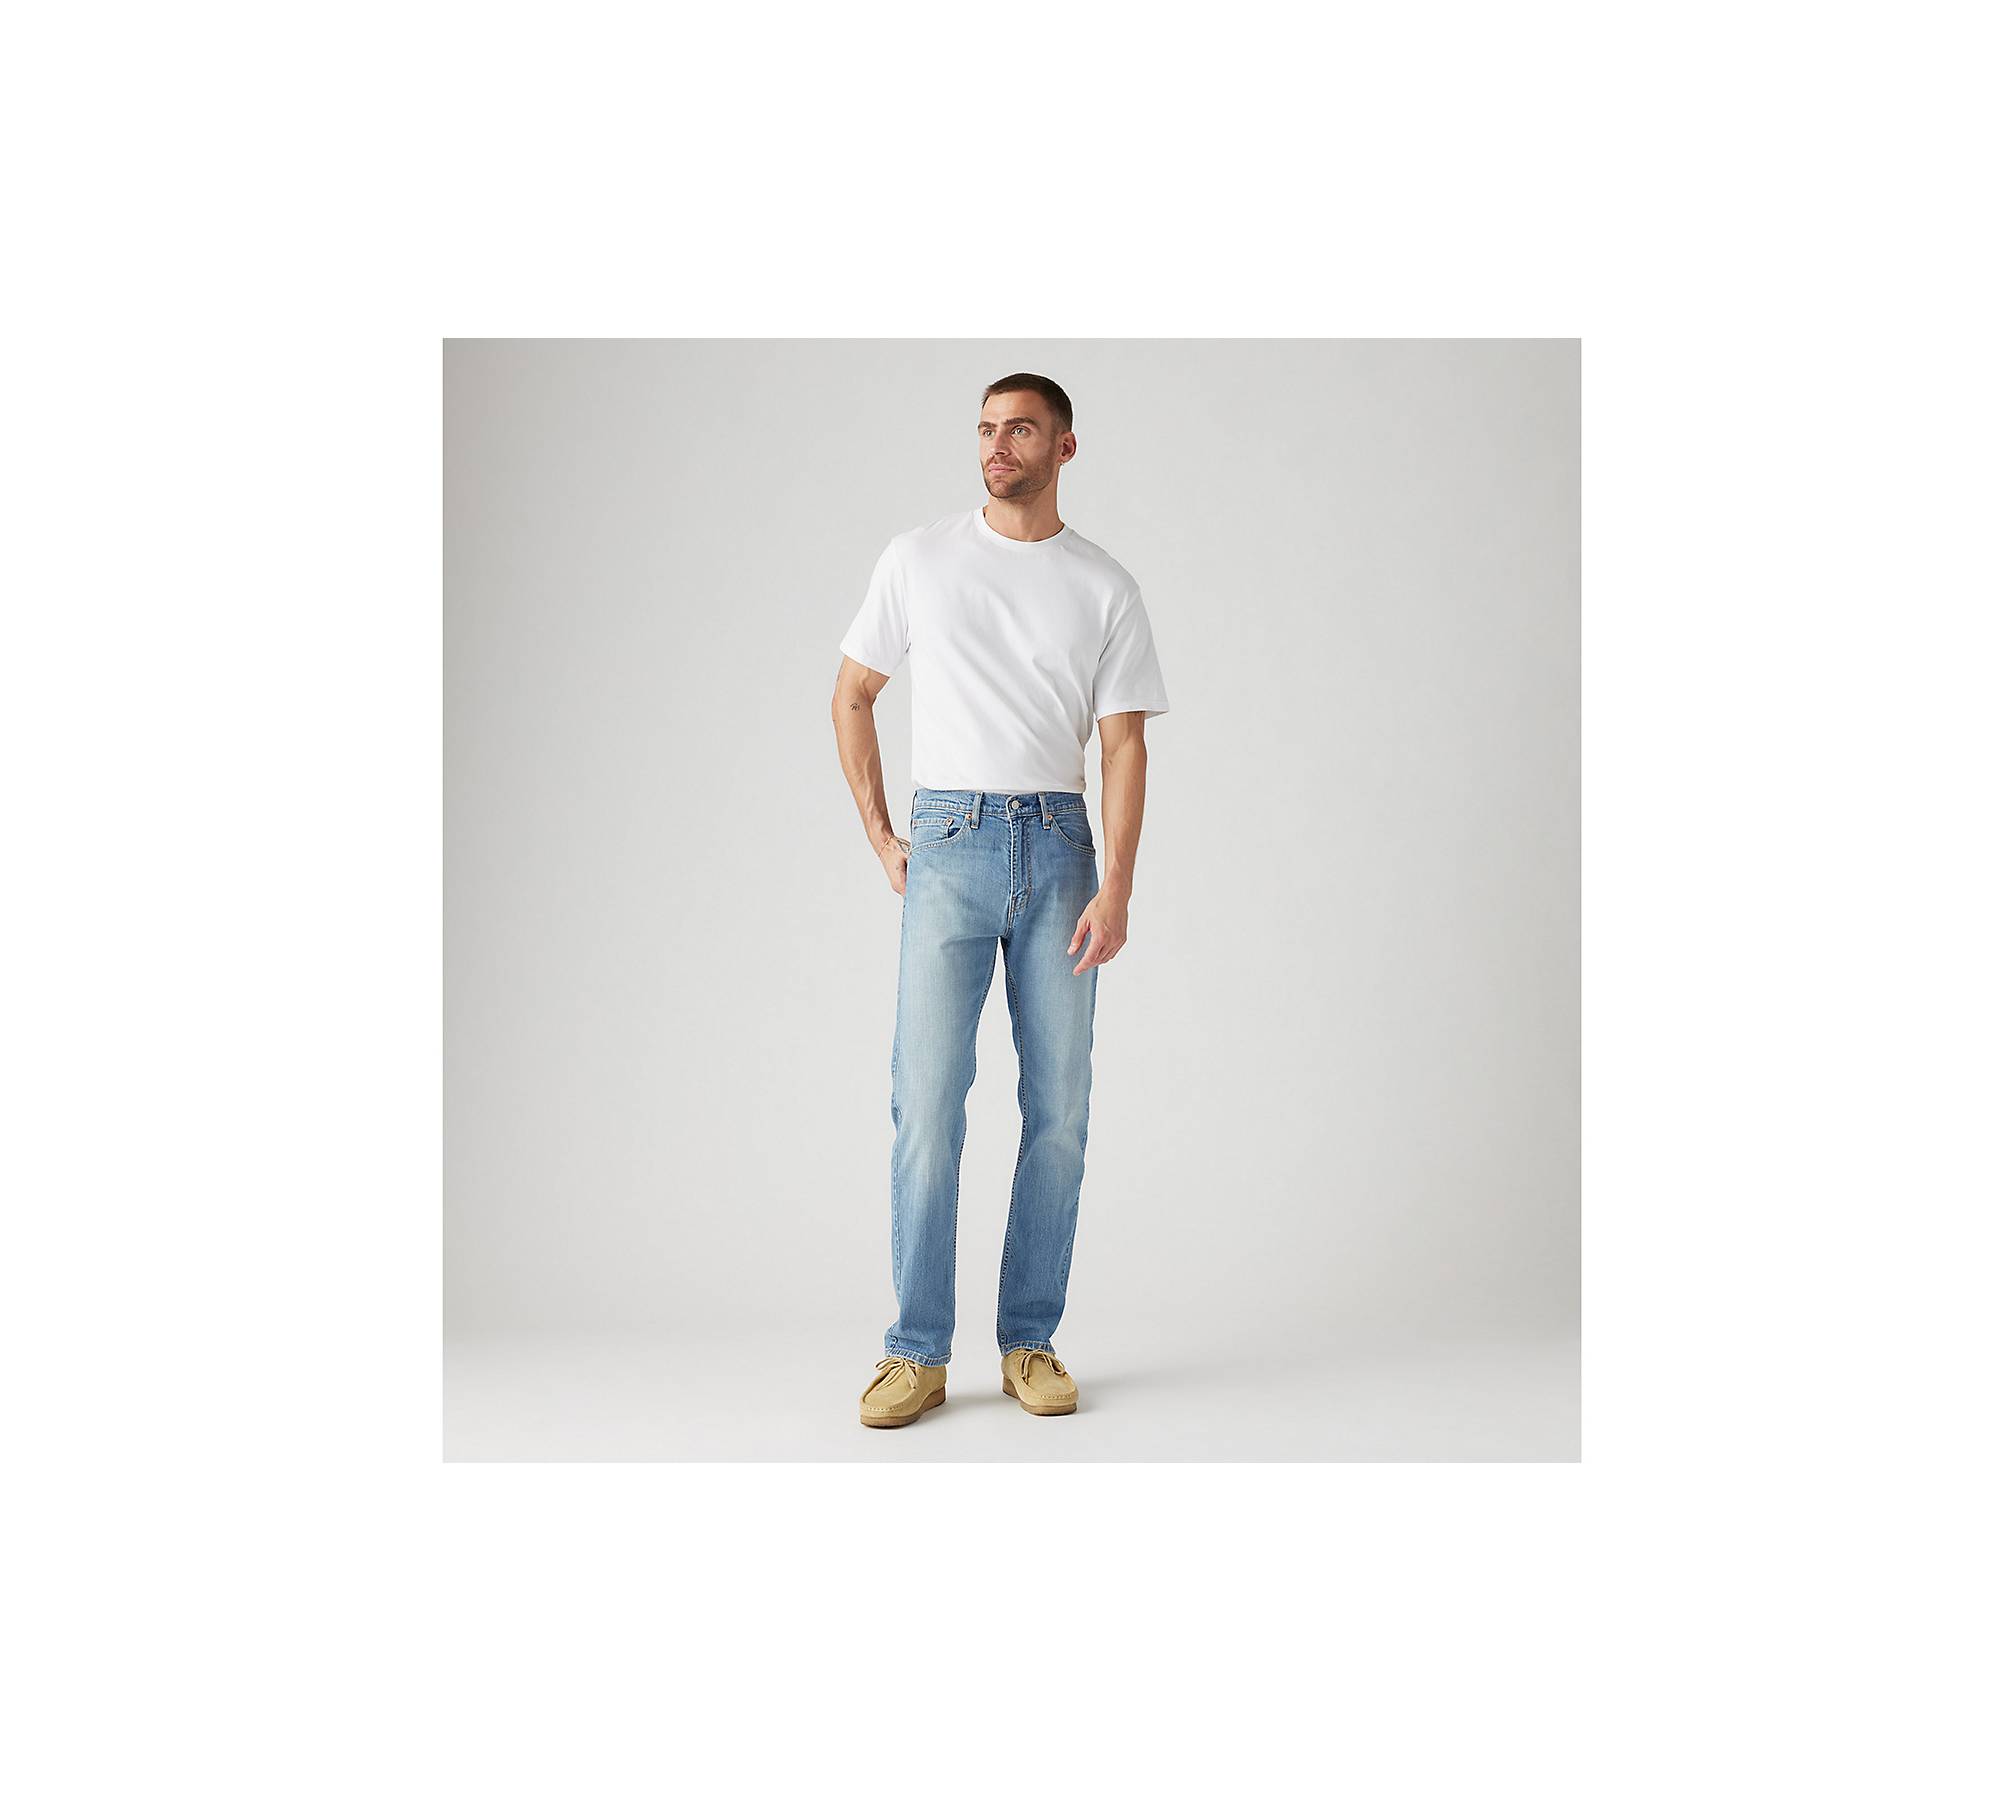 Men's regular fit jeans, New collection